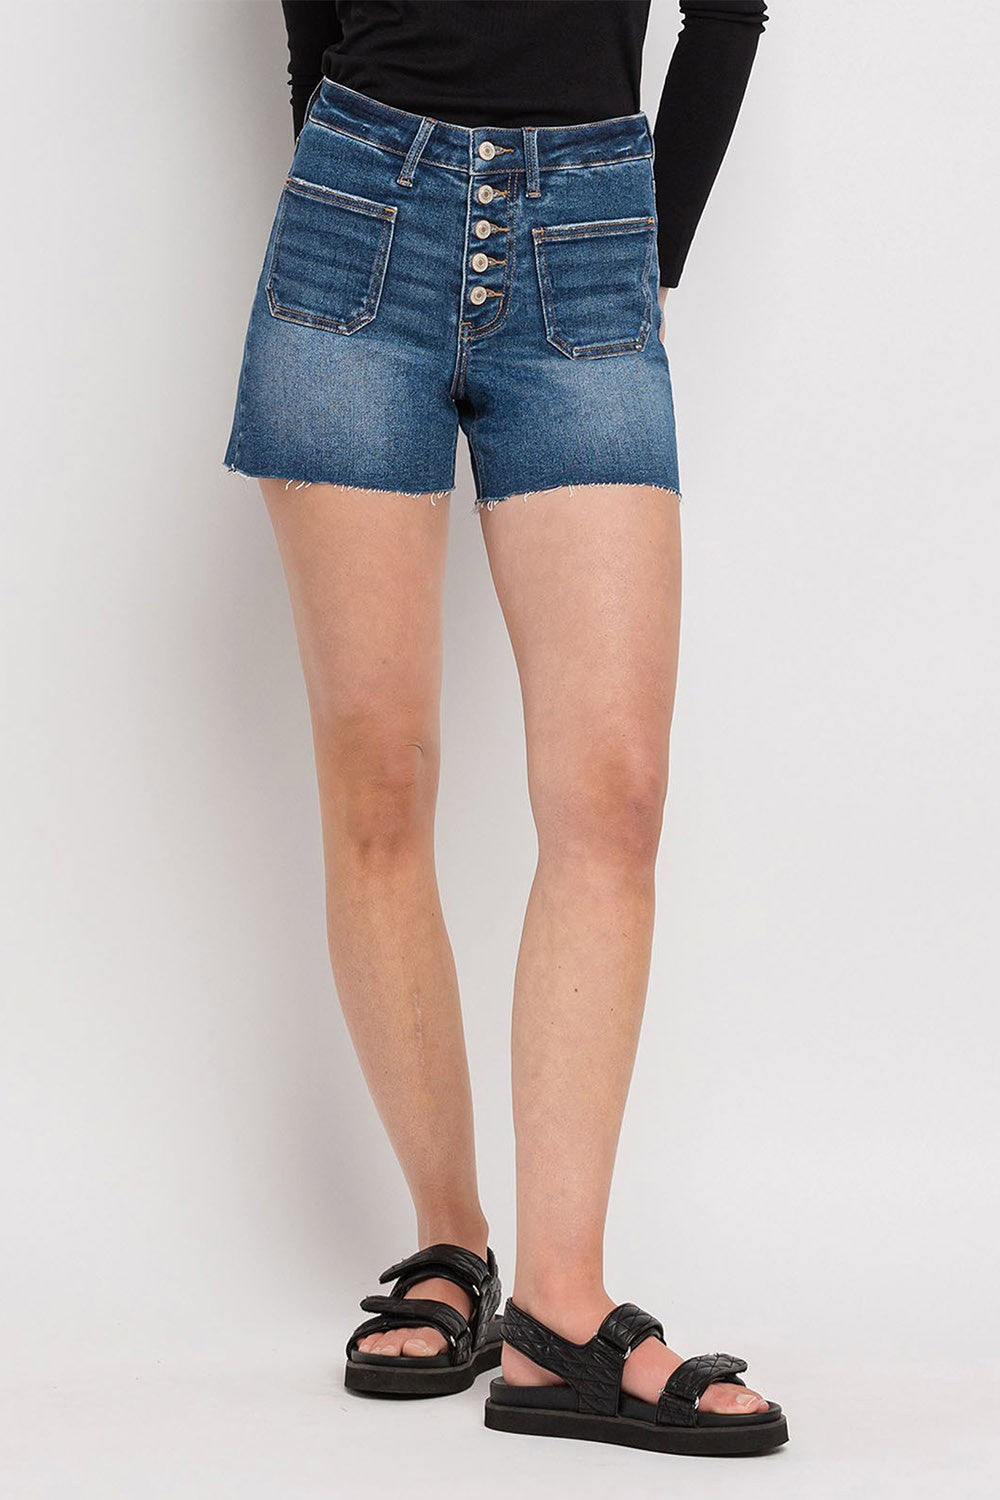 High Rise Patched Button Fly Shorts by Lovervet